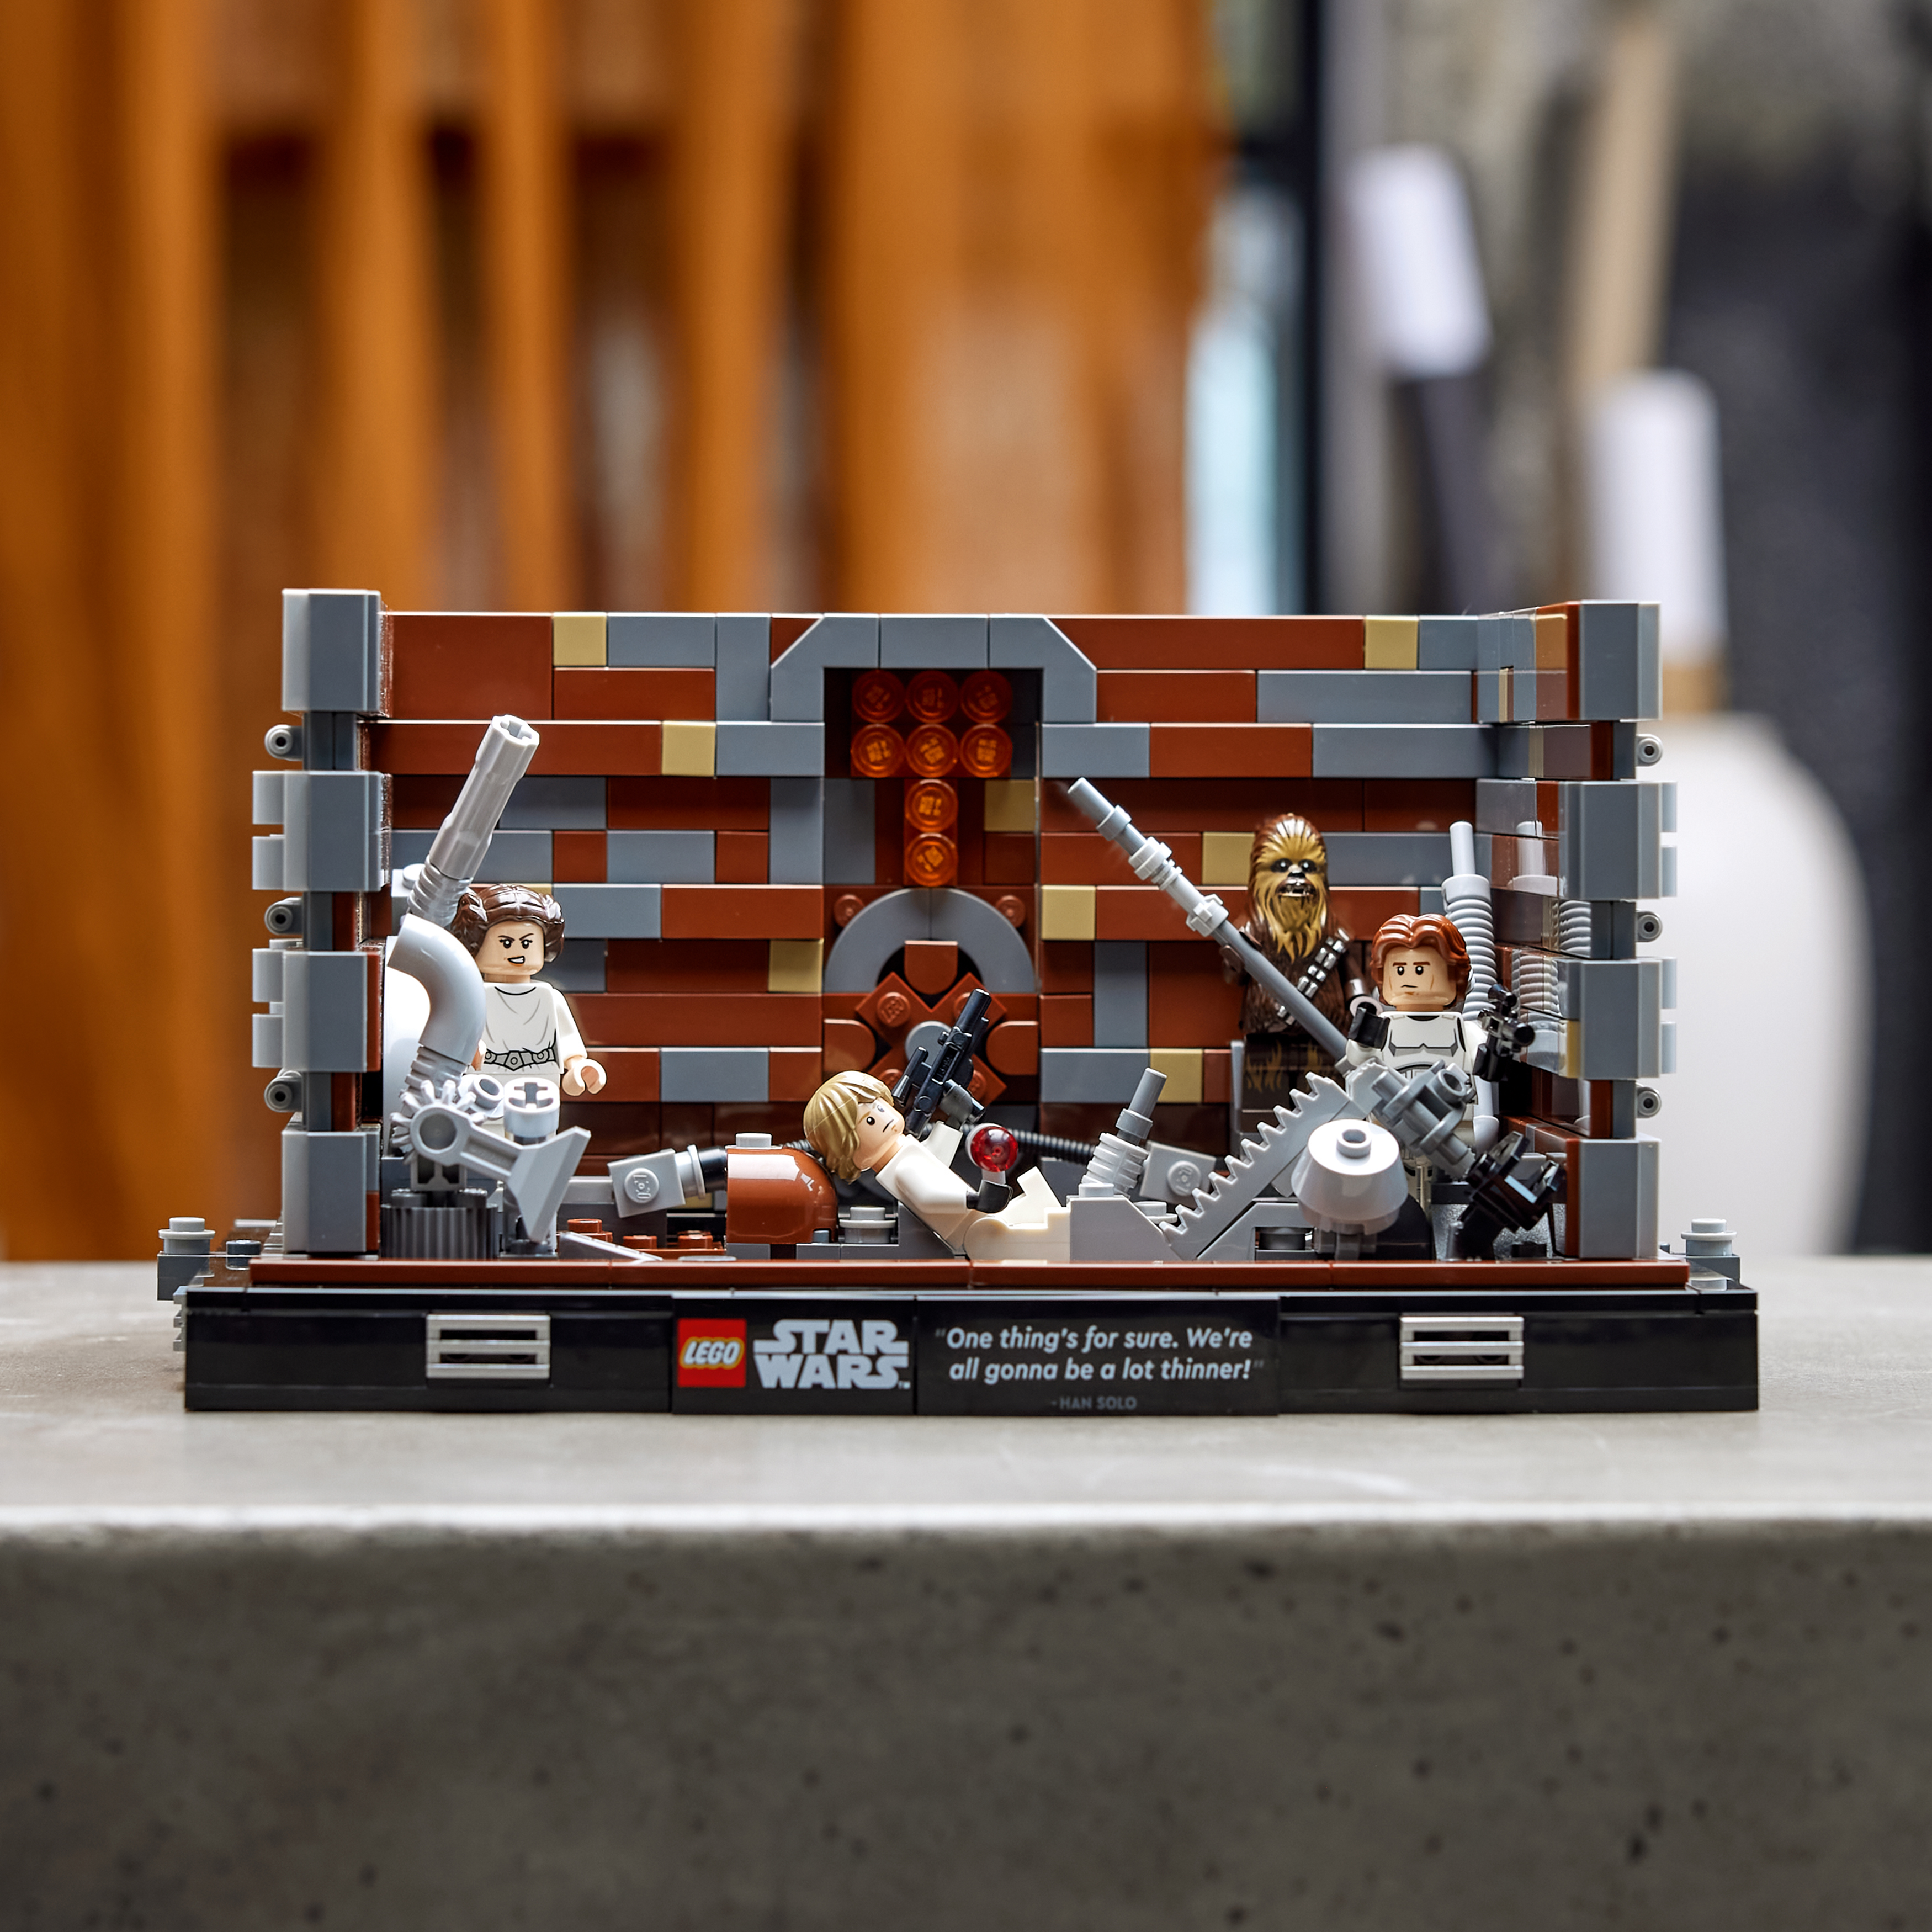 LEGO Announces Three Exciting New Star Wars Building Sets Inspired by  Season 2 of The Mandalorian 